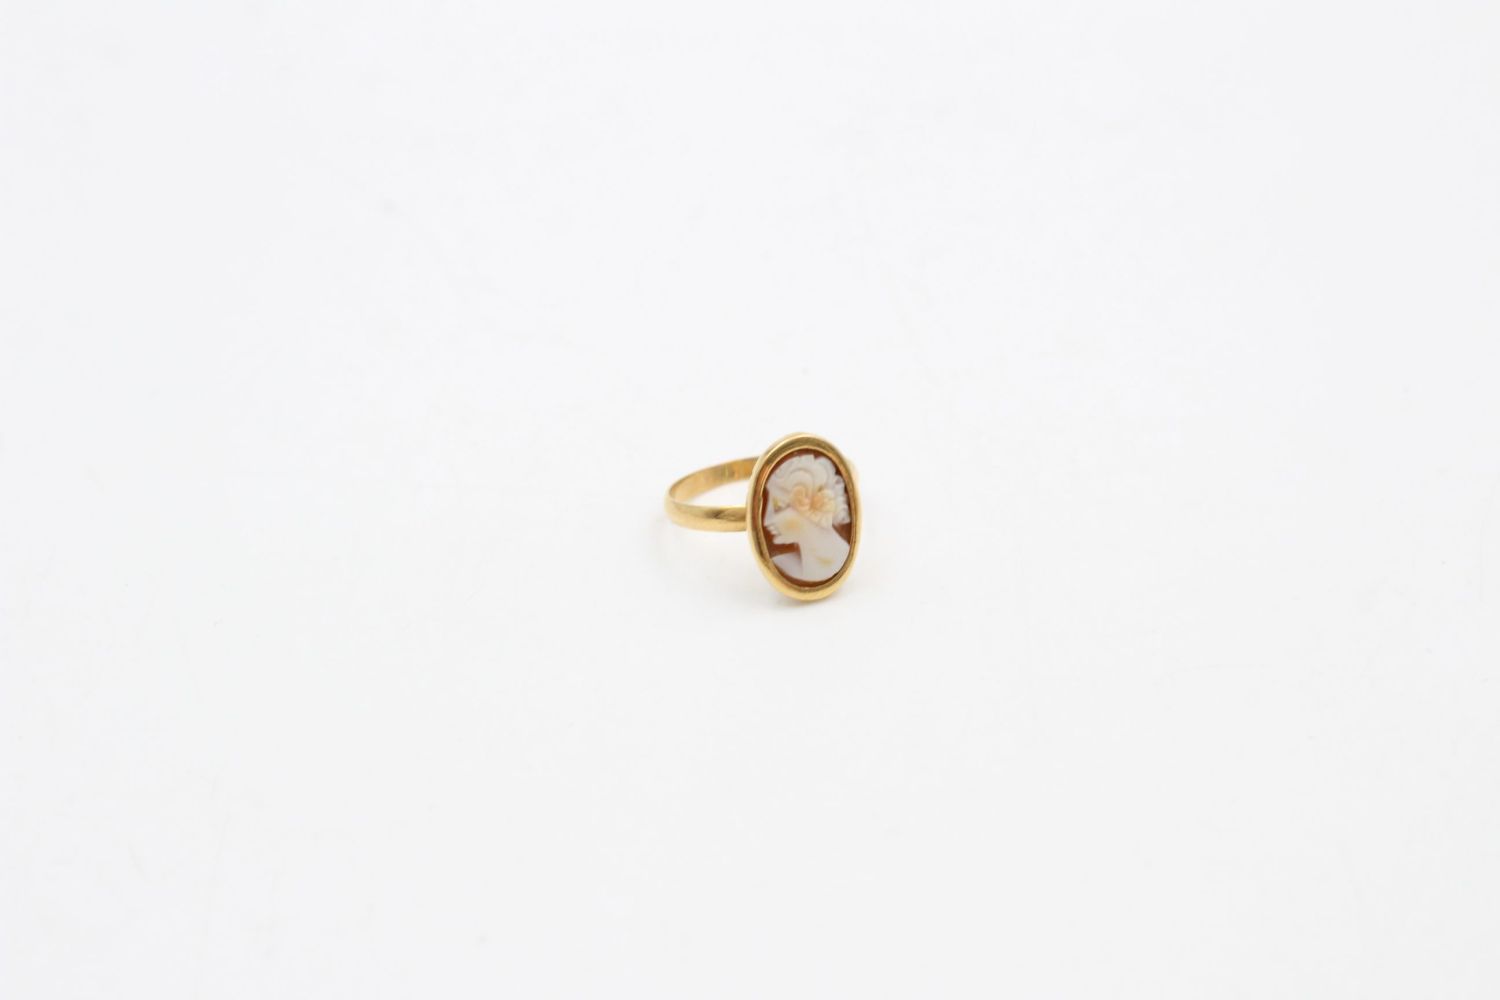 18ct Gold frame shell cameo ring 2.2 grams gross - Image 2 of 4